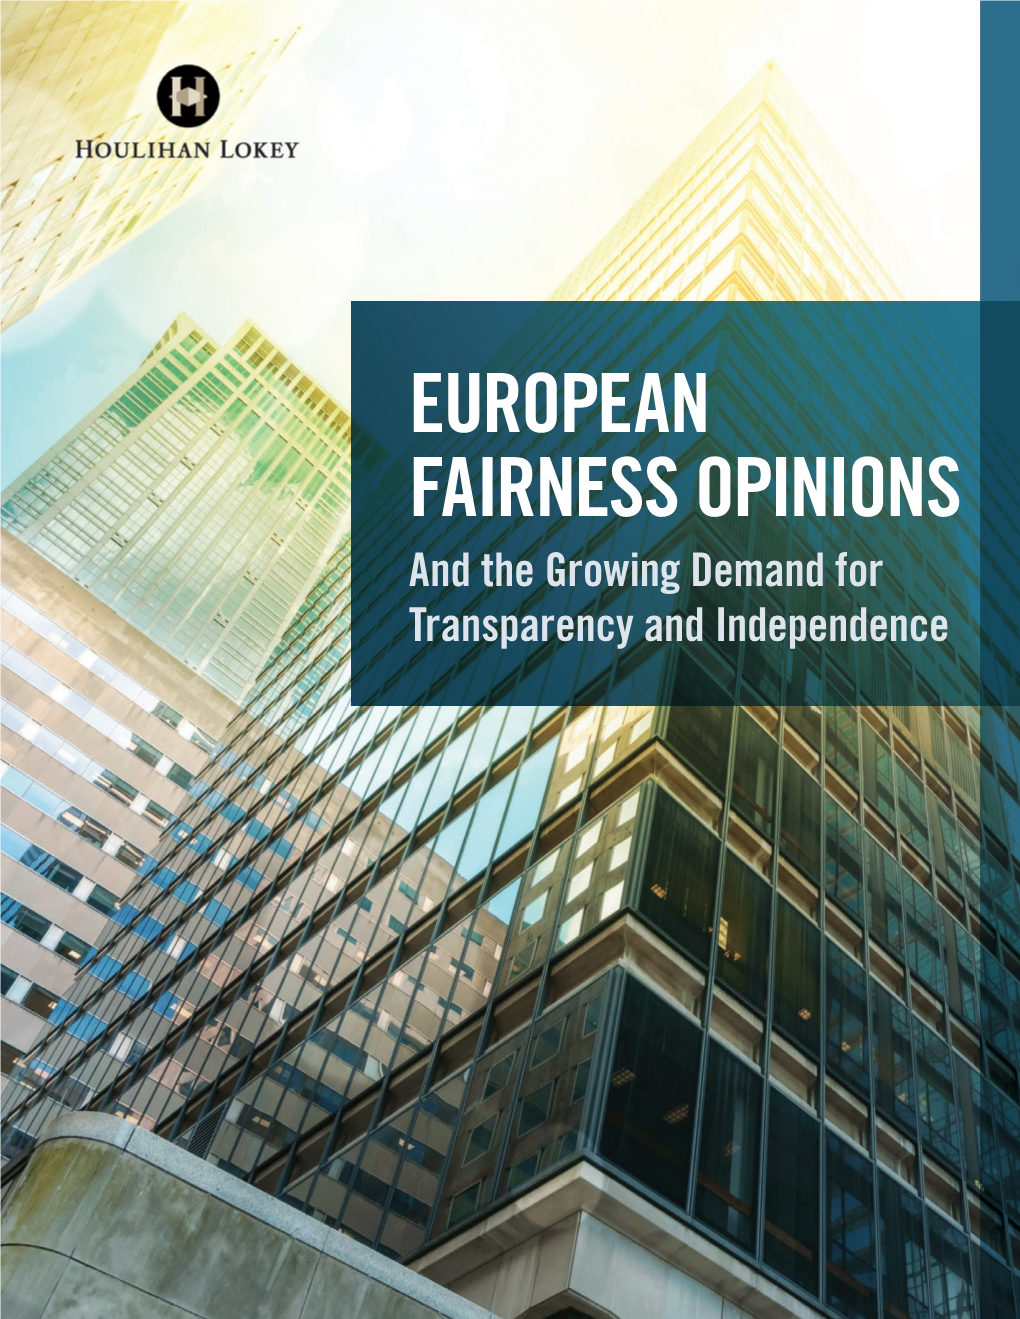 European Fairness Opinions and the Growing Demand for Transparency